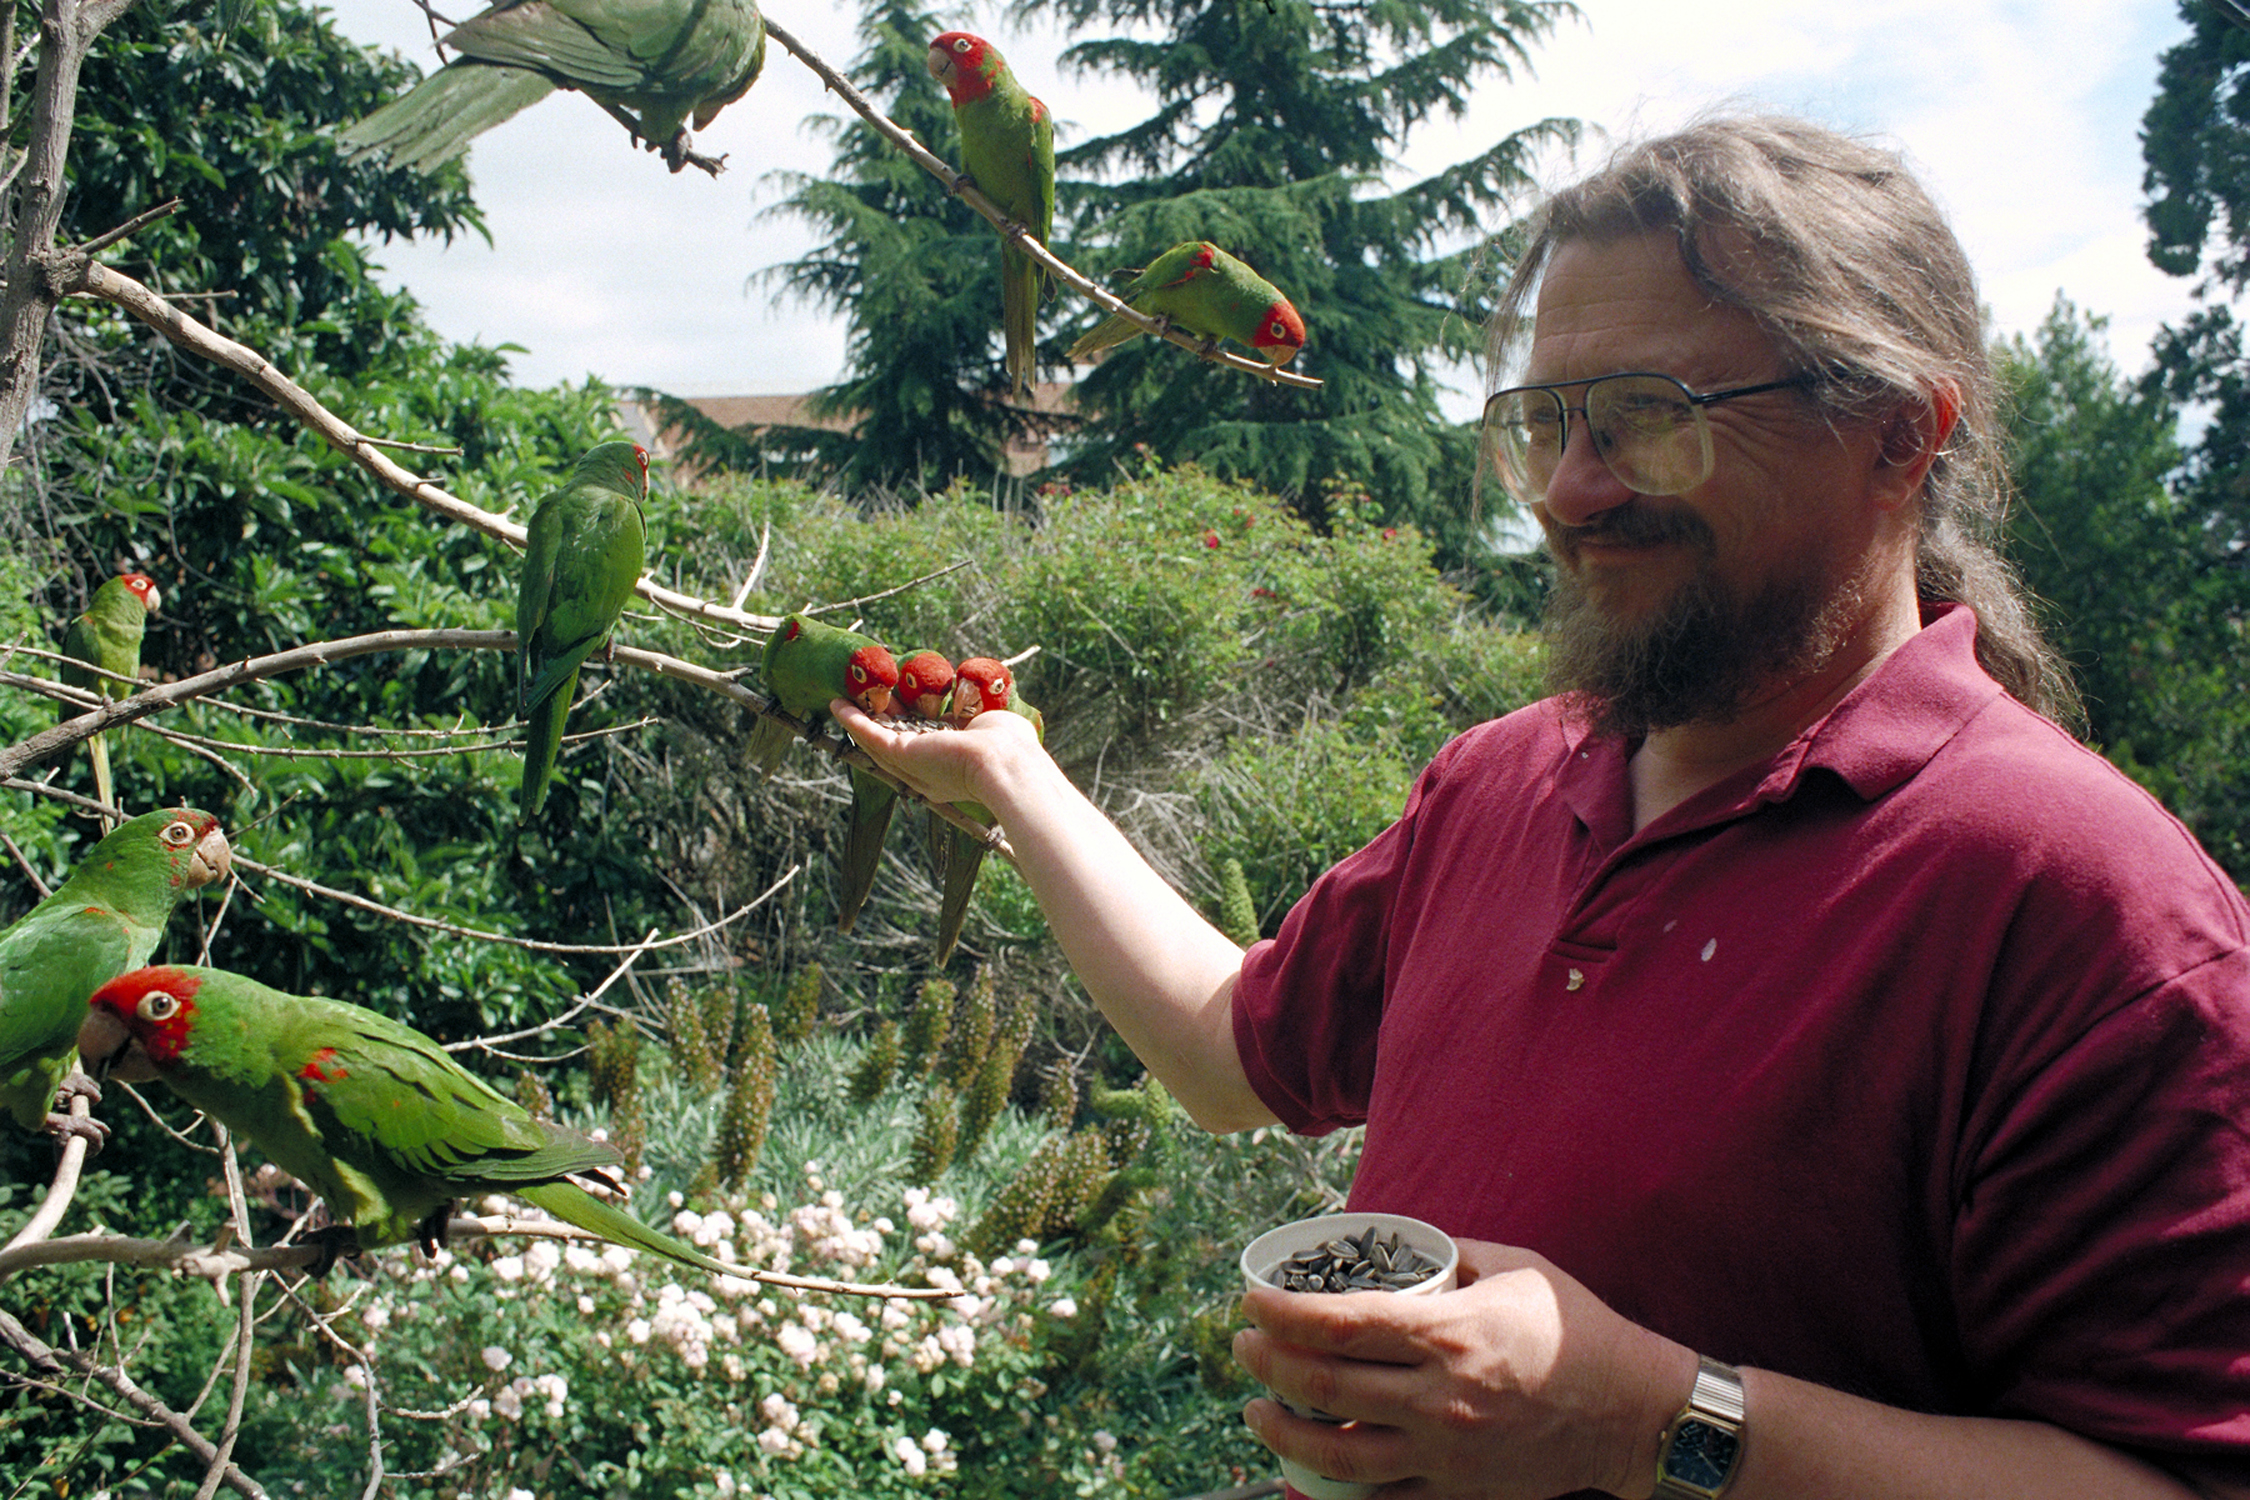 A man stands by a tree feeding parrots.